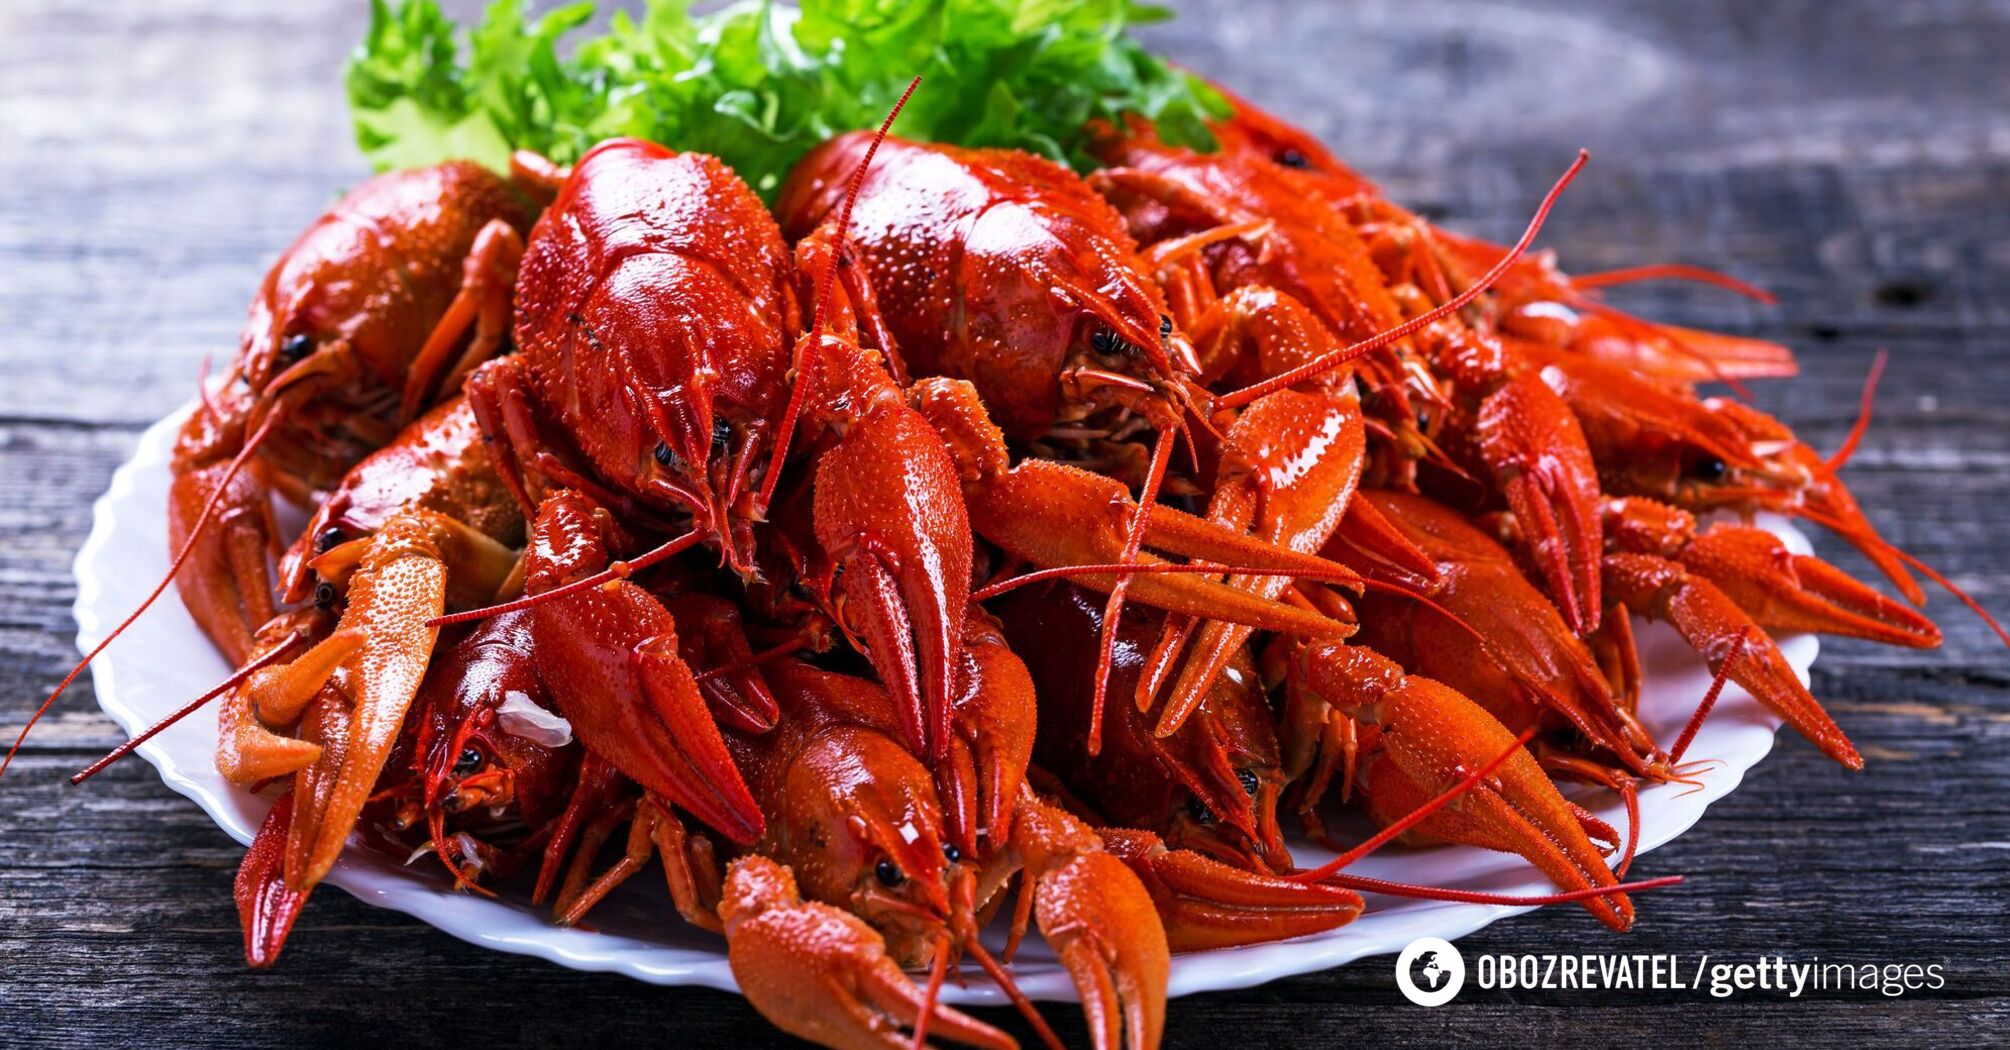 How to cook crayfish deliciously